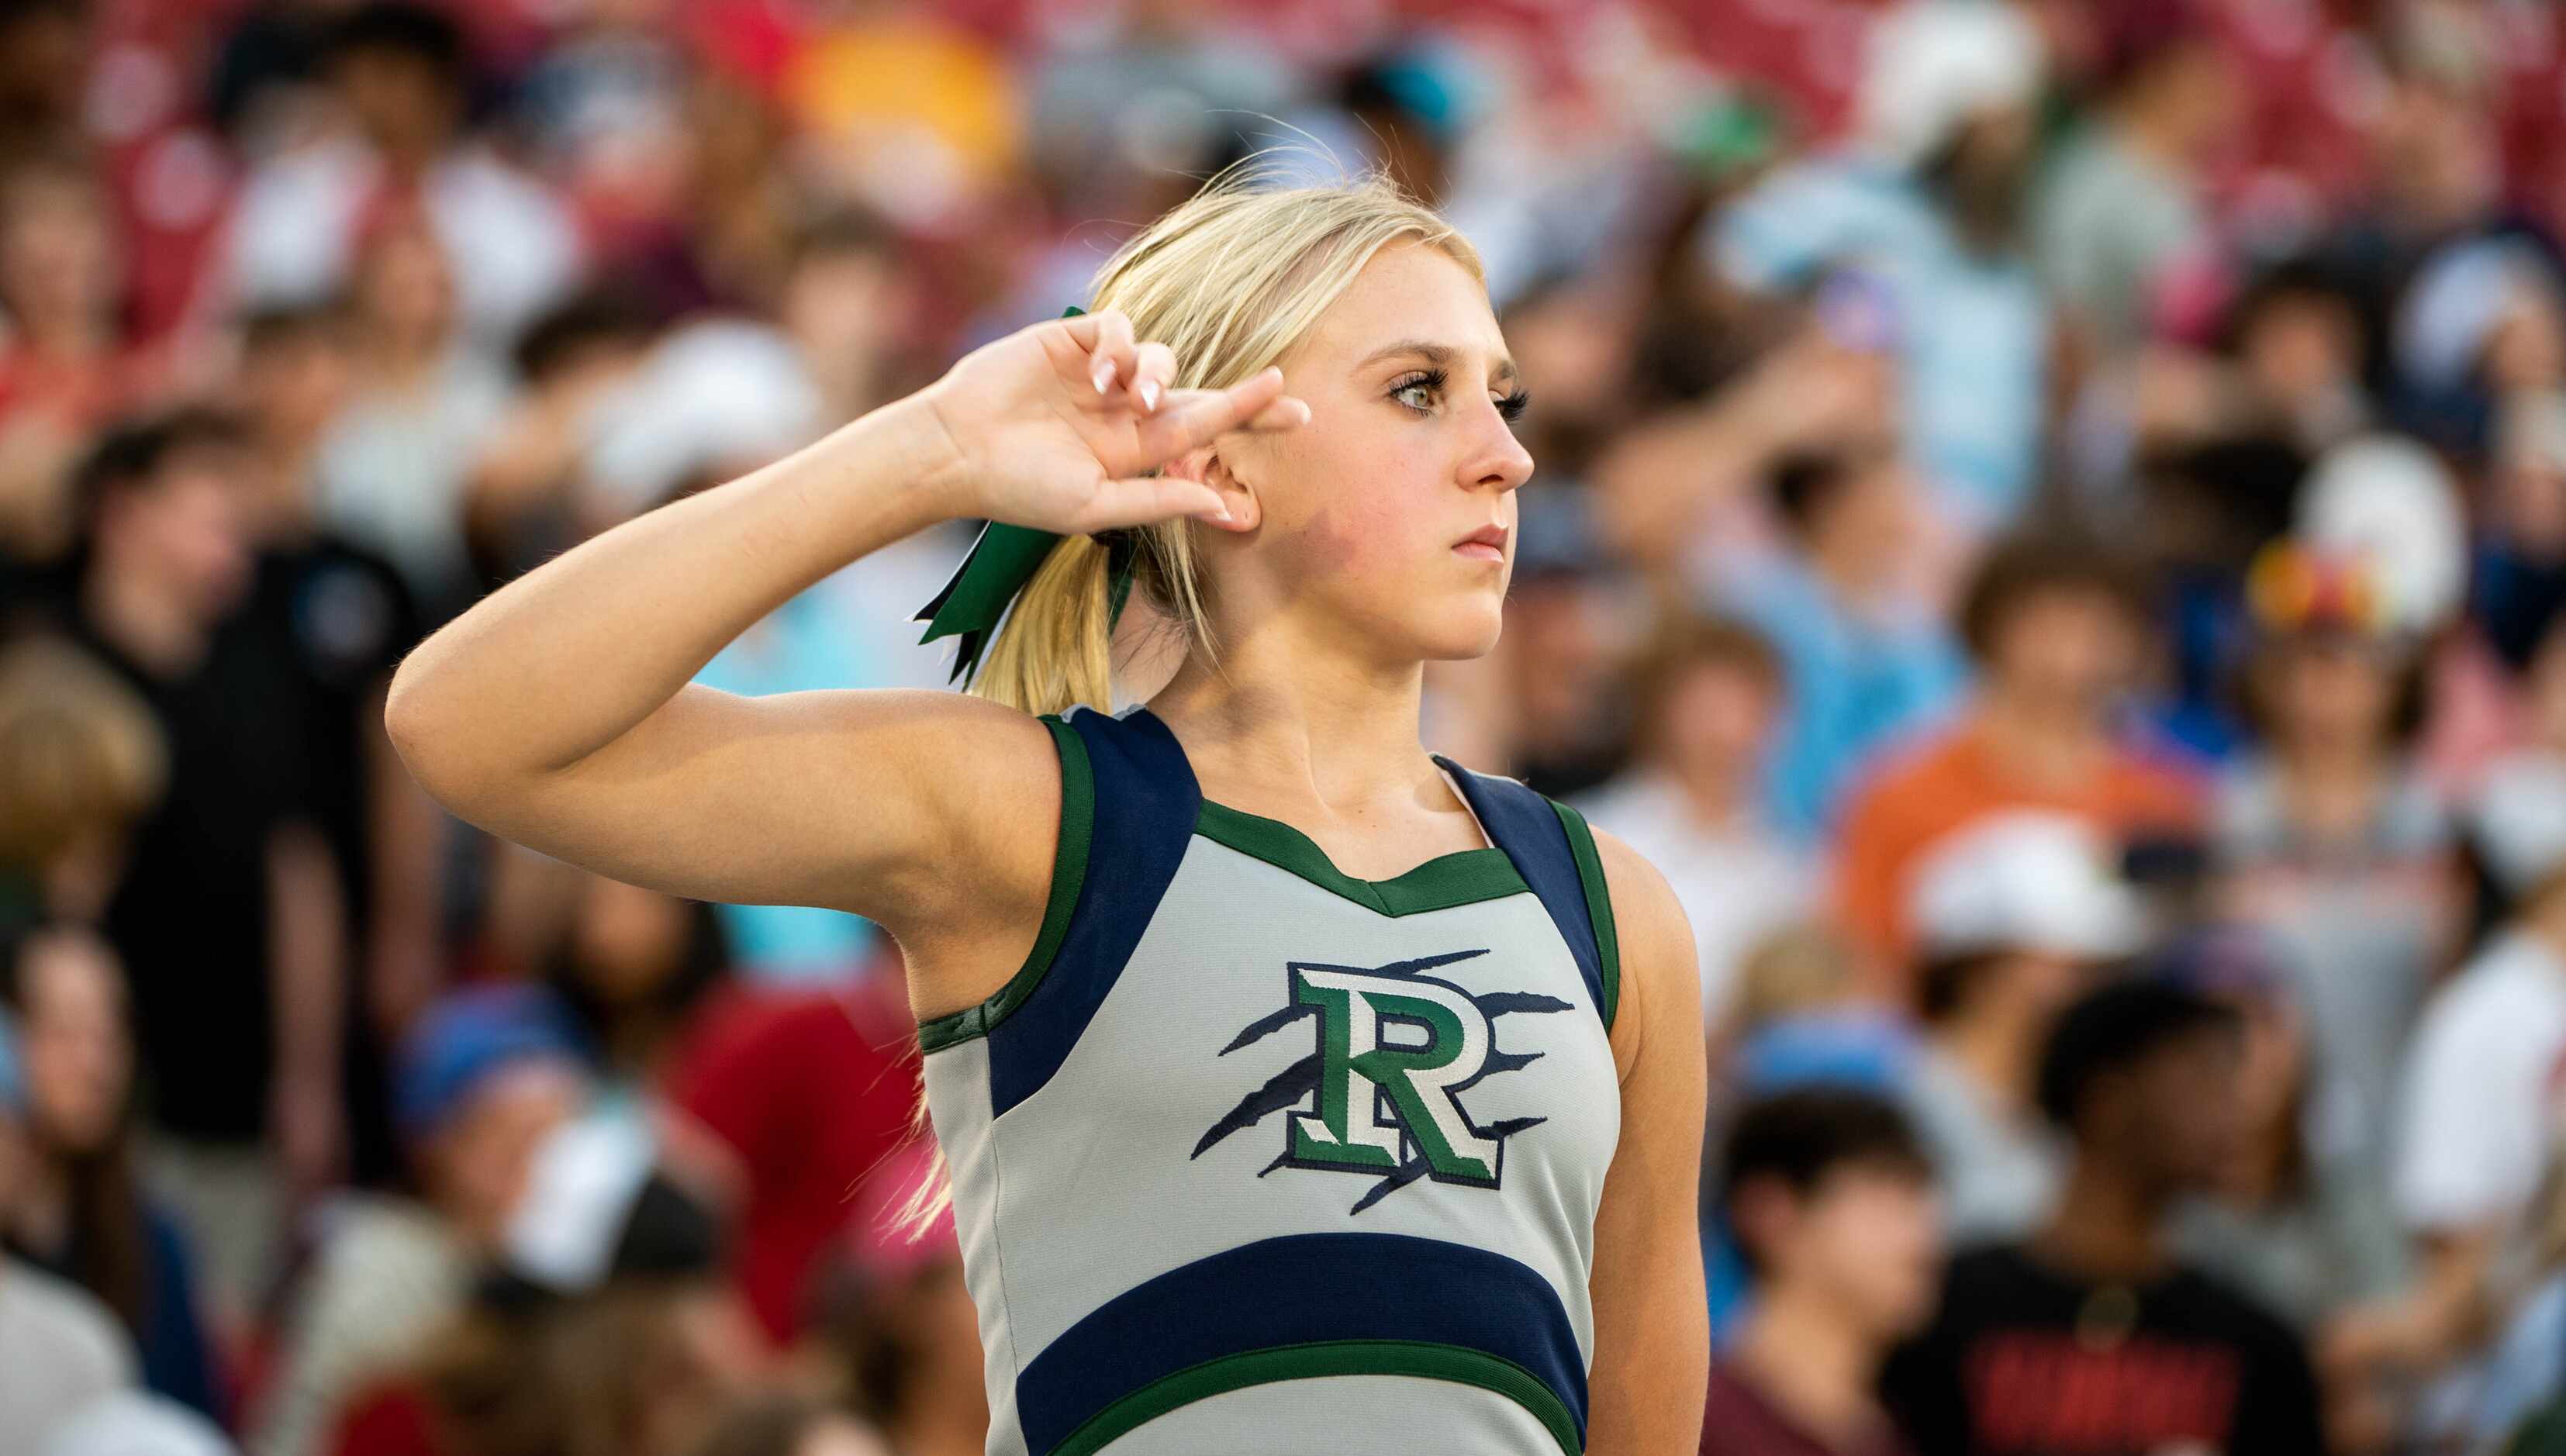 Frisco Reedy's cheerleader waits for the opening kickoff during a high school football game...